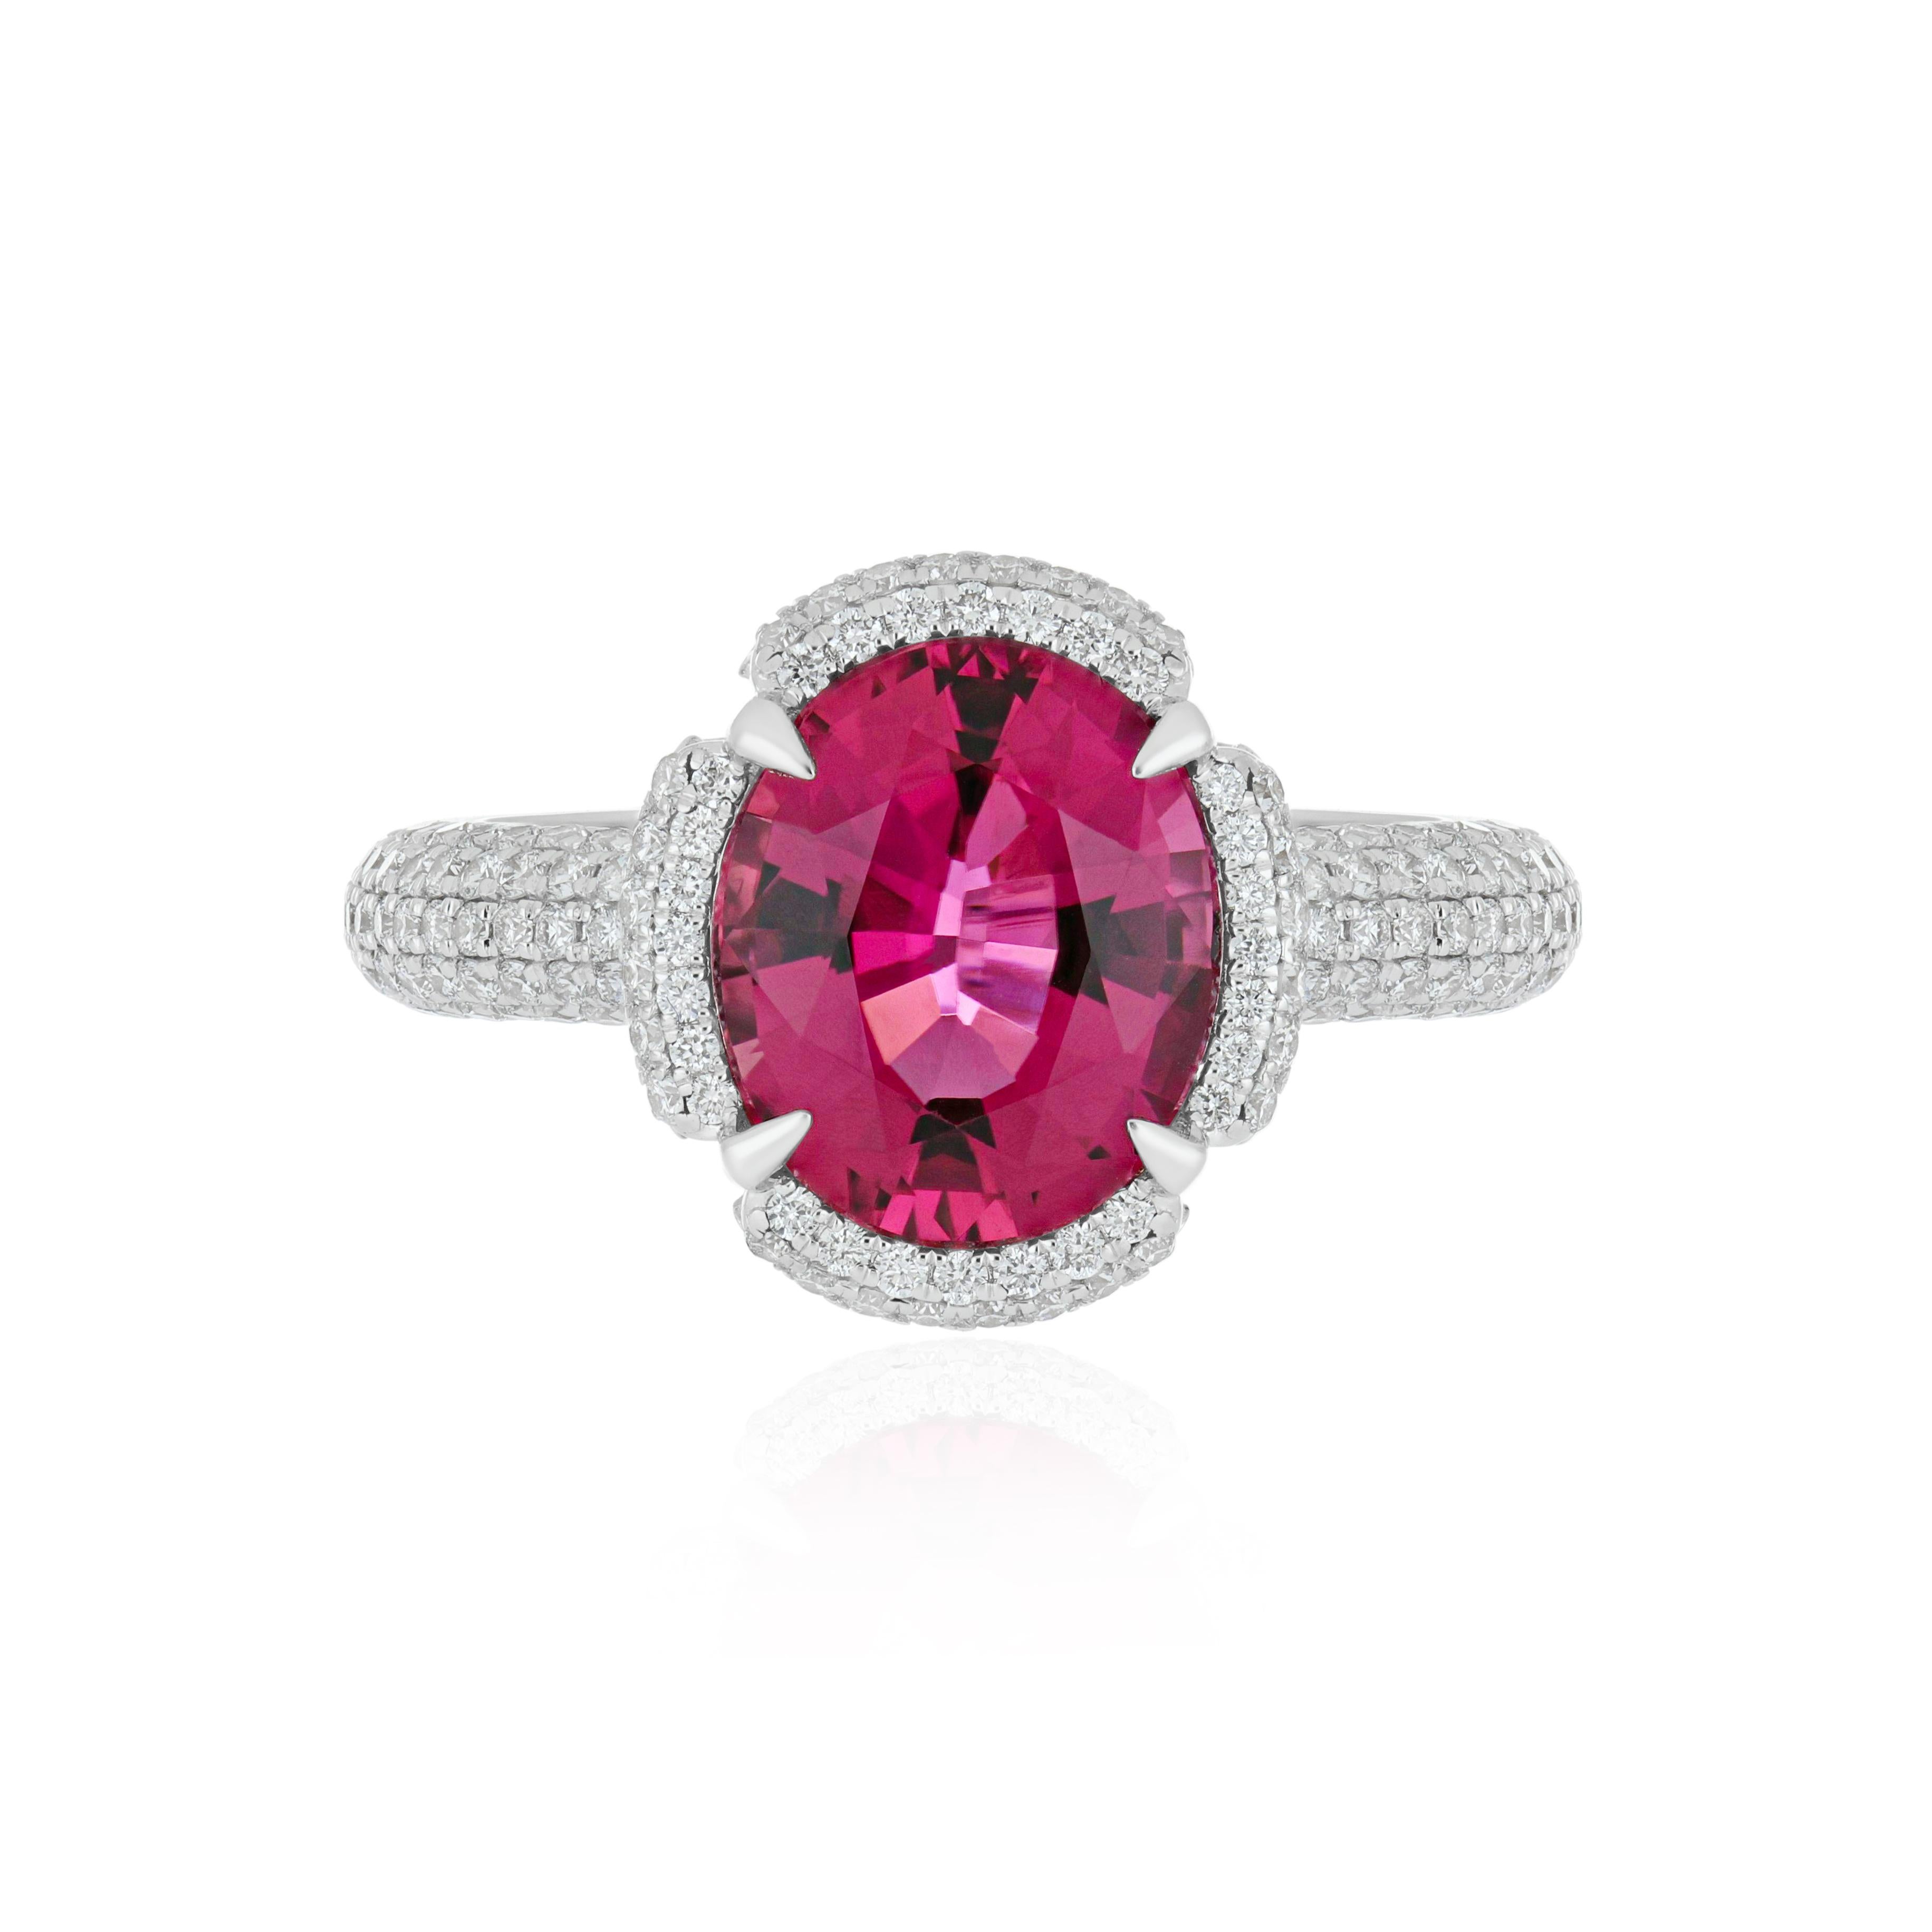 4.3 Carat Rubellite and Diamond Studded Ring in 18K White Gold Ring For Sale 2